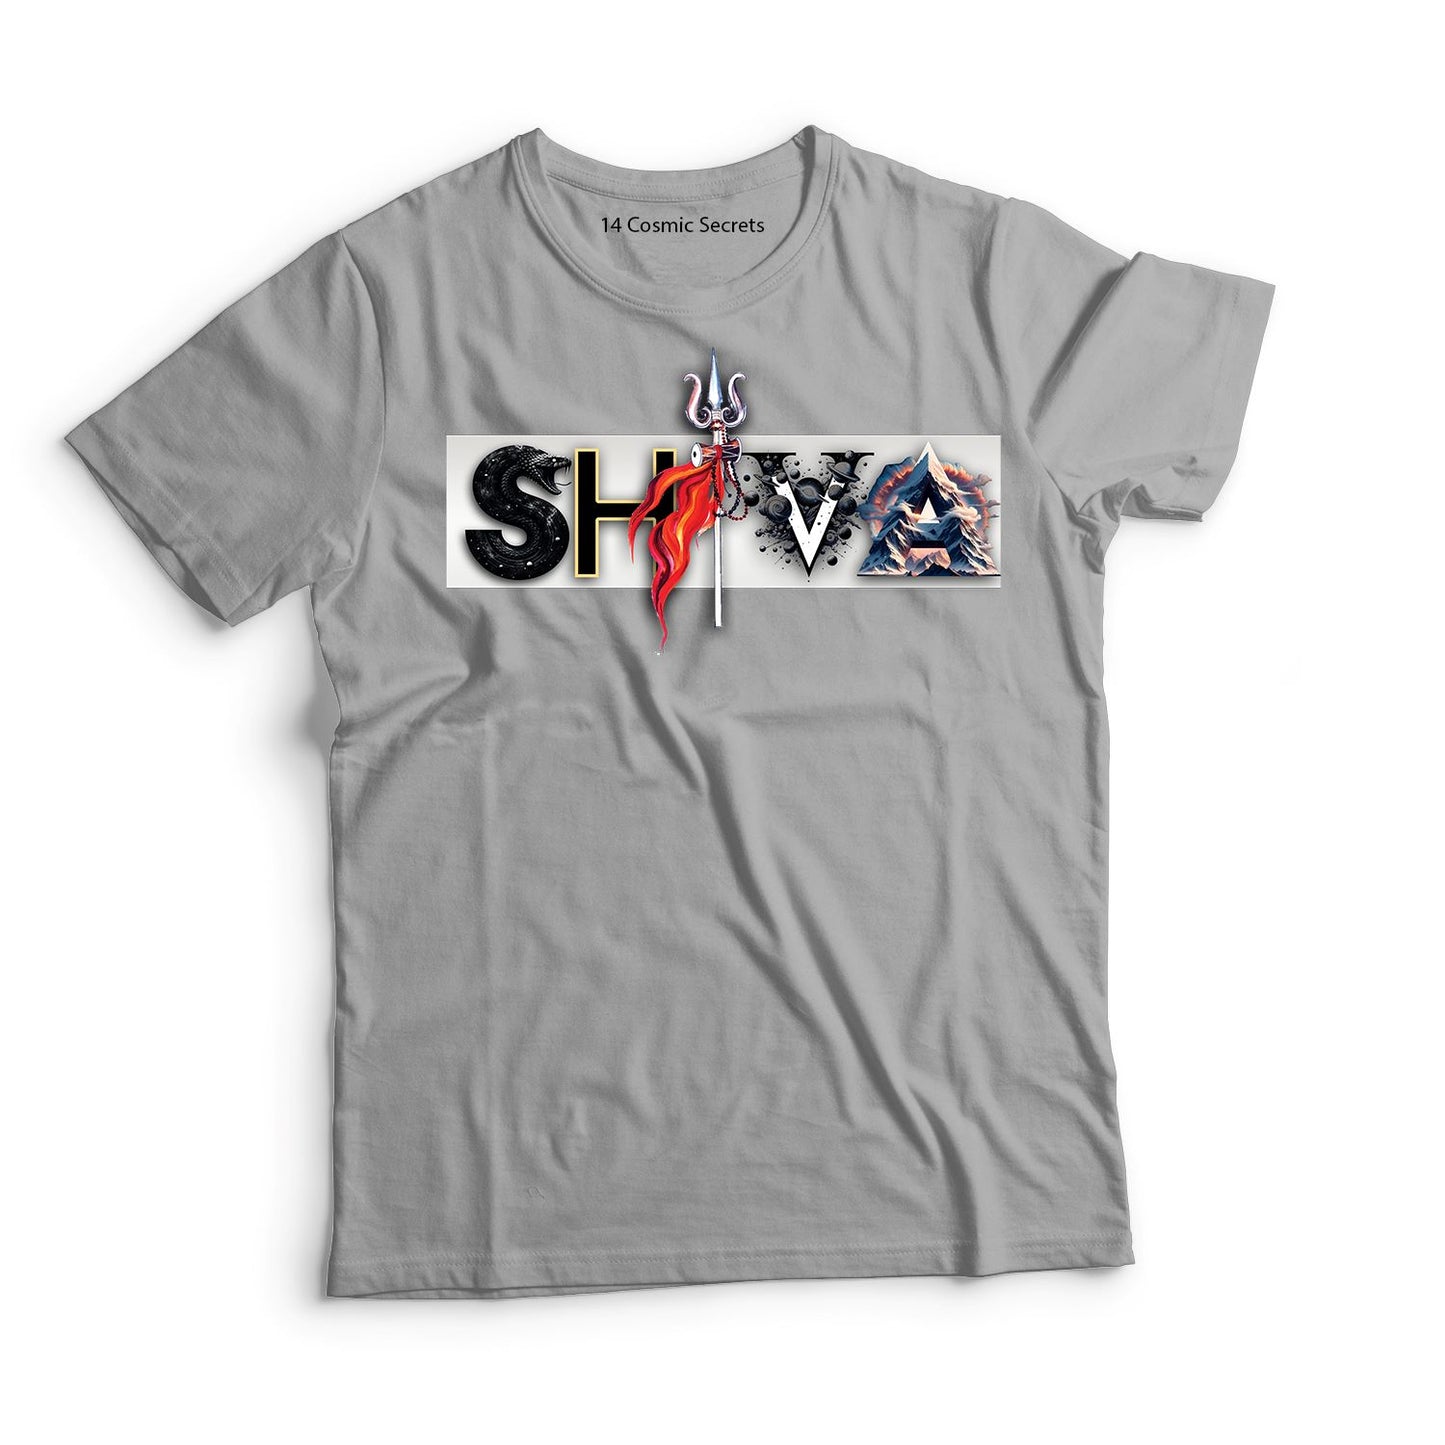 Shiva Graphic Printed Cotton T-Shirt for Men Trinity Collection T-Shirt  🔱🔱🔱